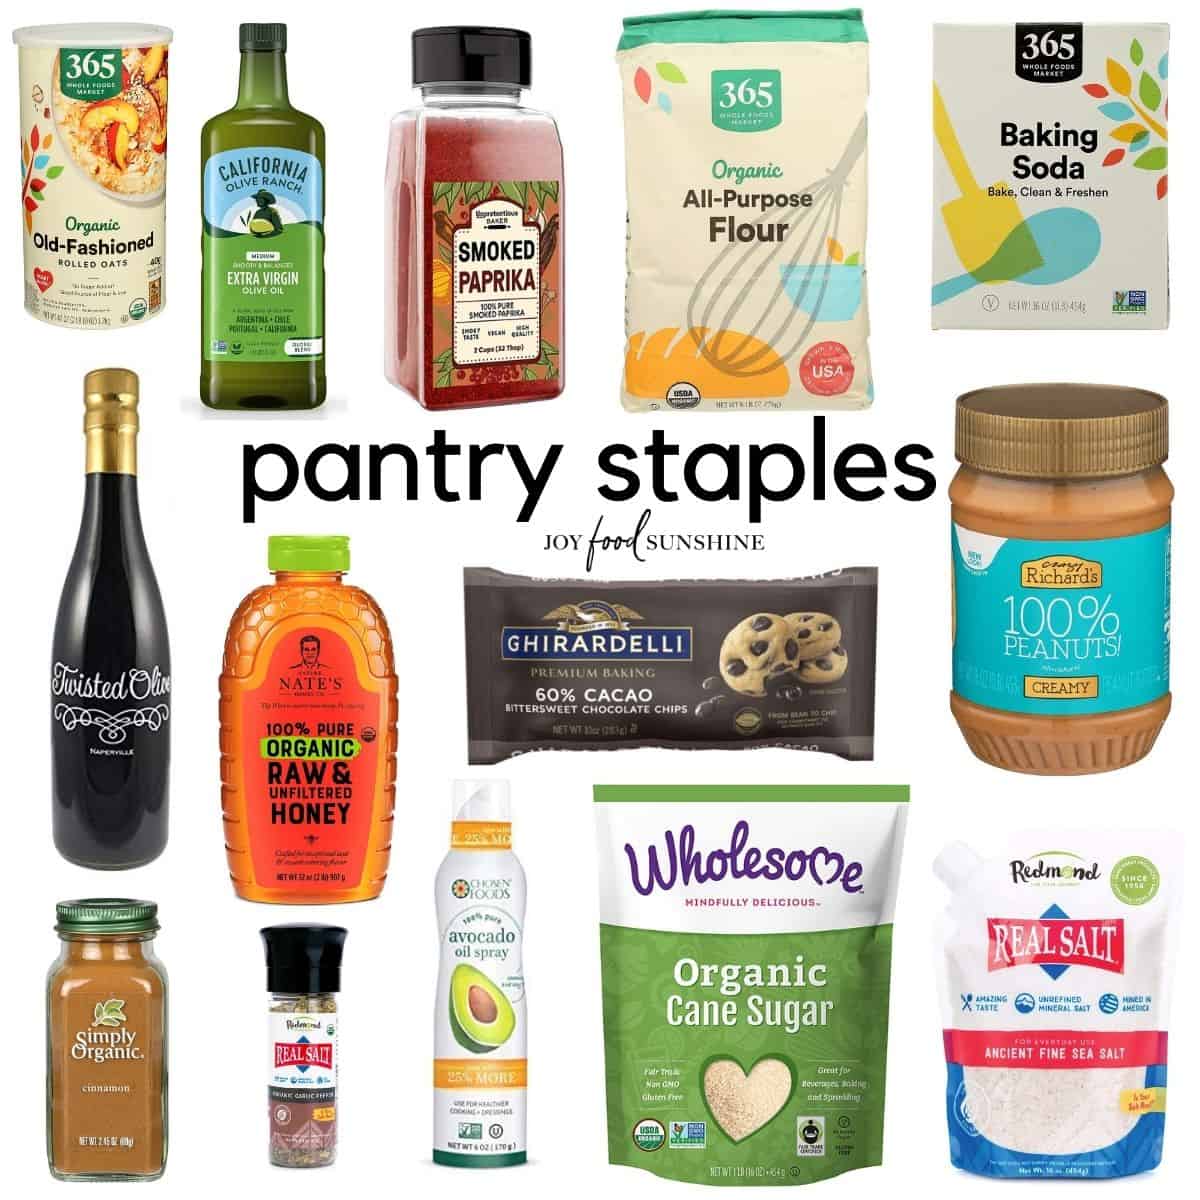 ) Discounted pantry staples